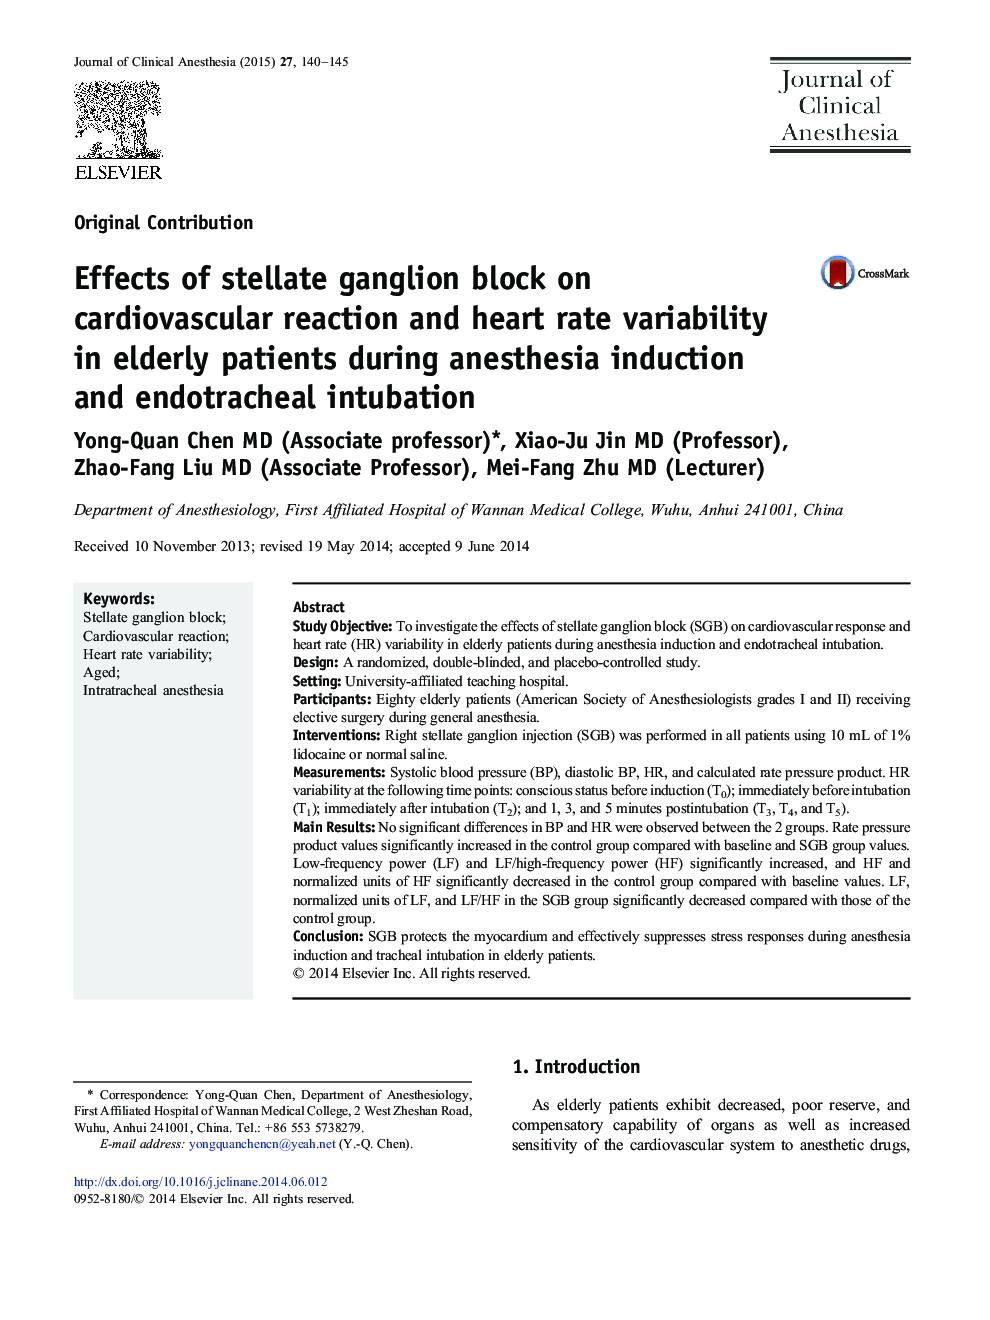 Effects of stellate ganglion block on cardiovascular reaction and heart rate variability in elderly patients during anesthesia induction and endotracheal intubation